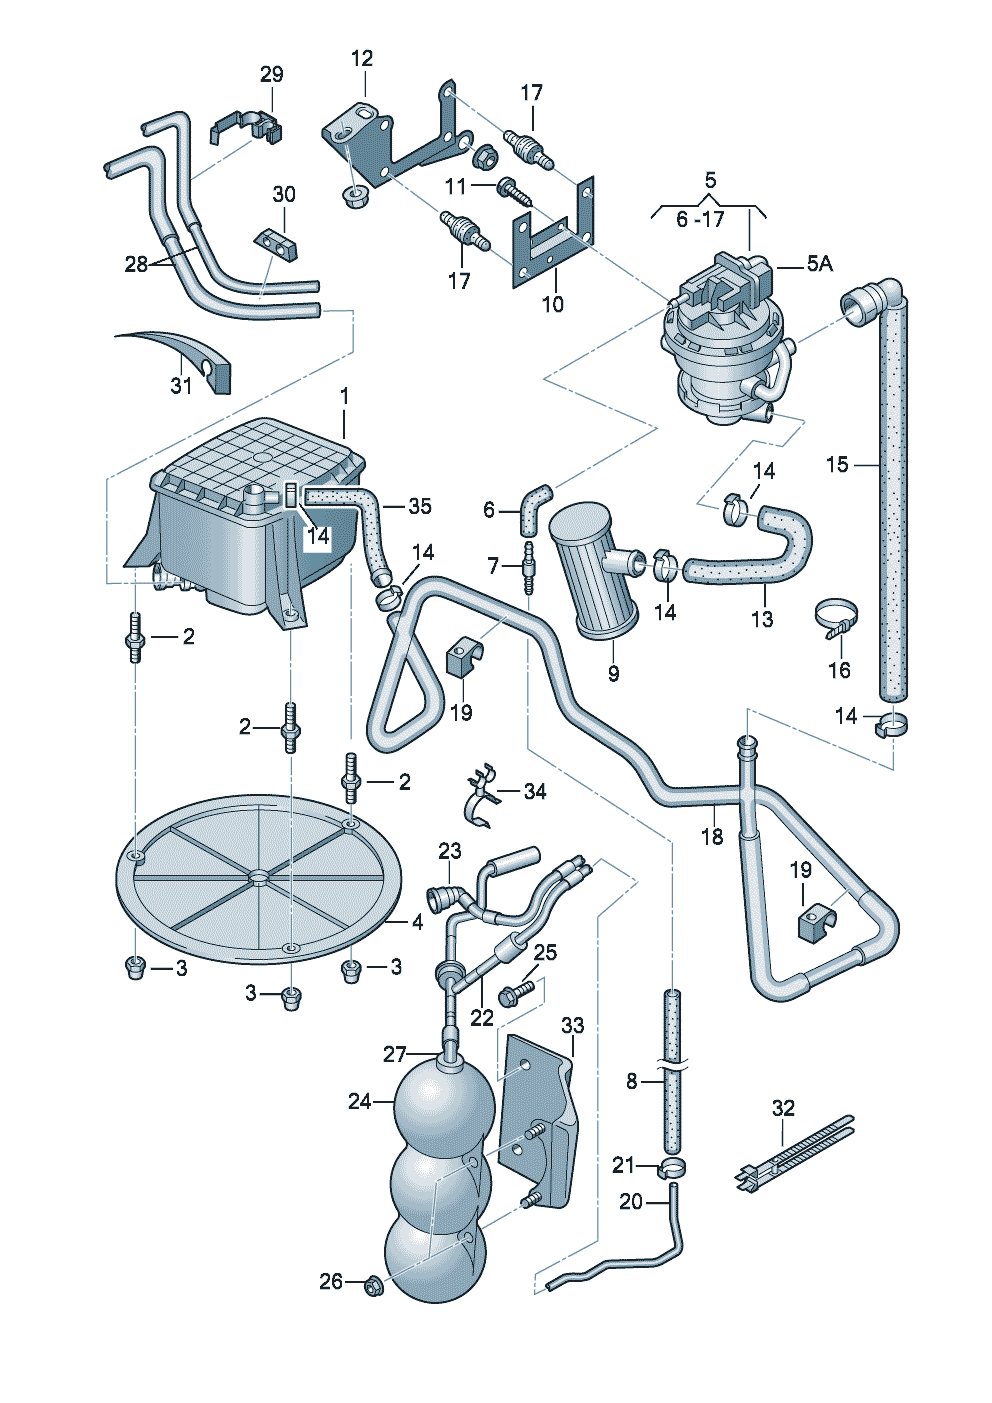 Activated charcoal containerdiagnosis pump for fuel<br>systemdiagnosis pump for fuel<br>system             see illustration:  201-098 - Audi A4/Avant - a4